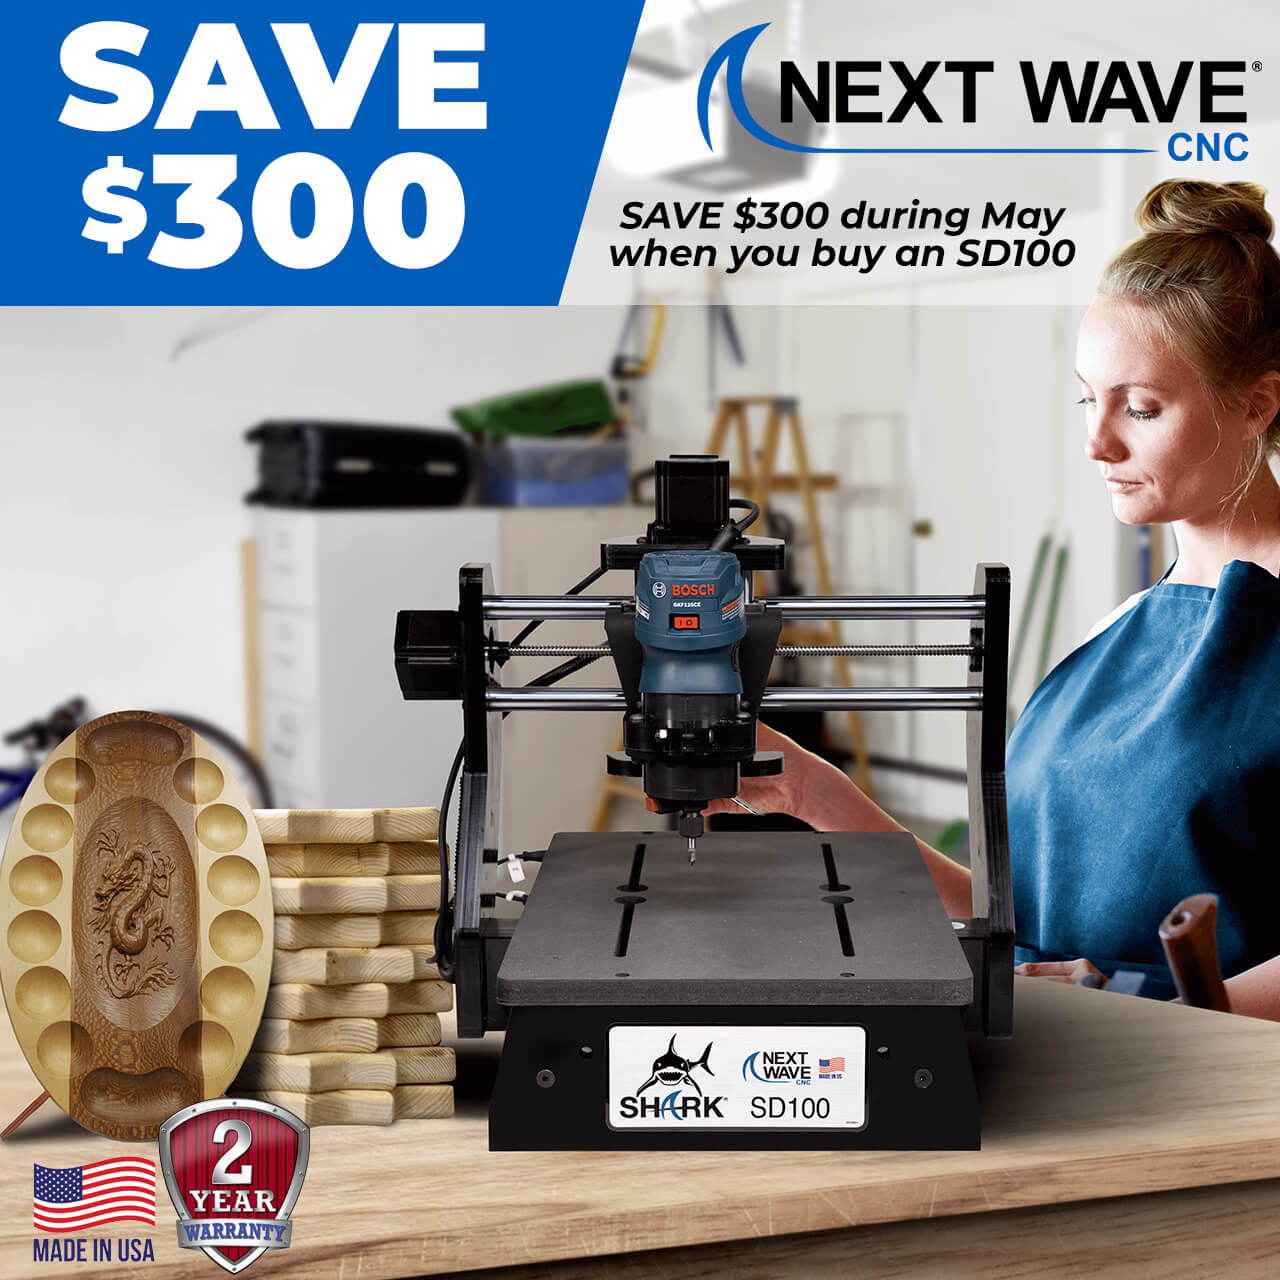 Save $300 during May when you buy an SD100